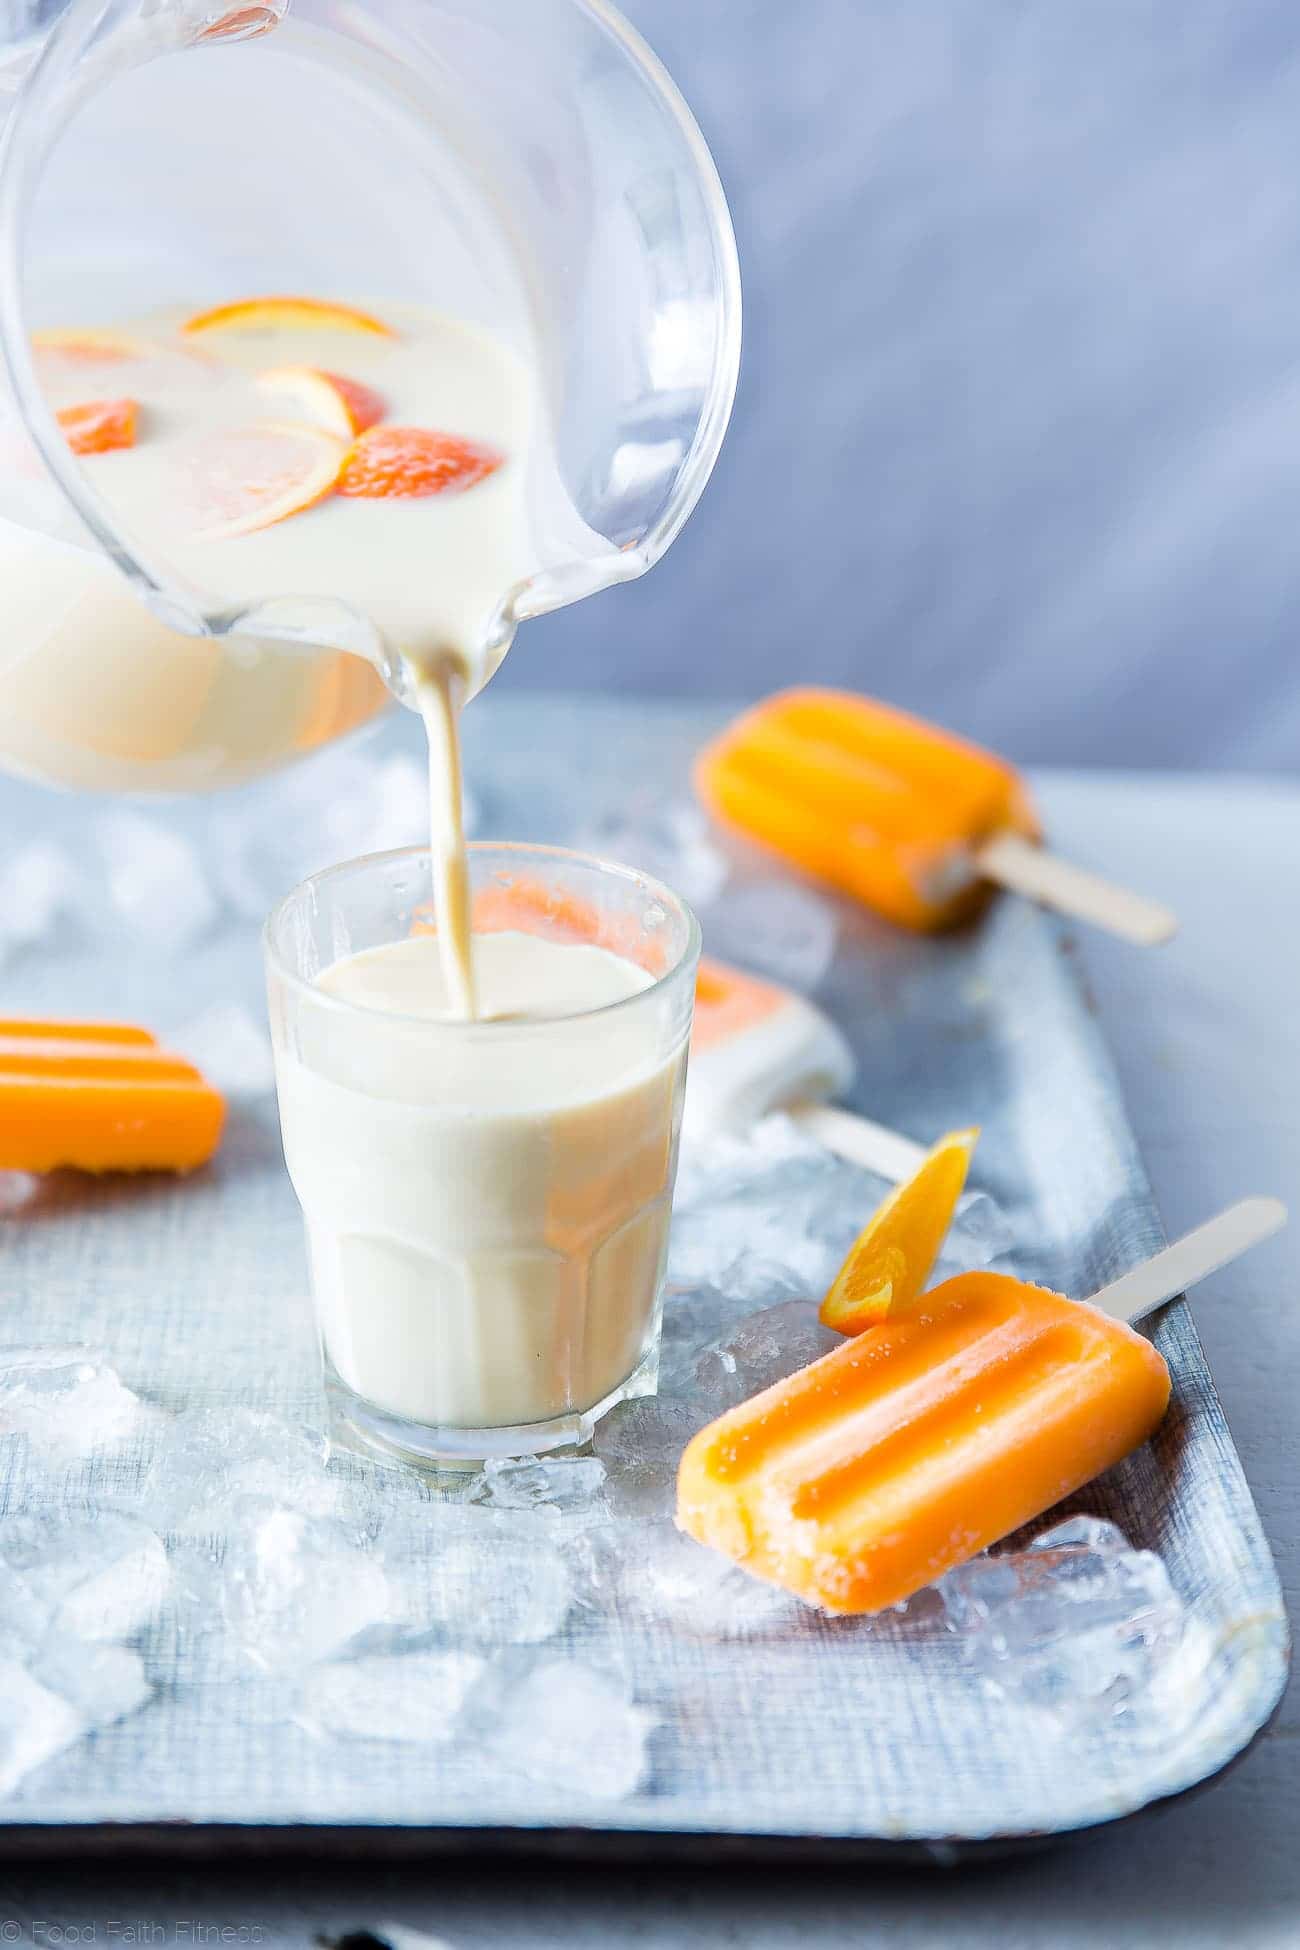 Creamsicle Cashew Milk - This quick and easy, 4 ingredient cashew milk recipe tastes like a creamsicle! It's a paleo, vegan and whole30 compliant drink that tastes better than store bought! | Foodfaithfitness.com | @FoodFaithFit